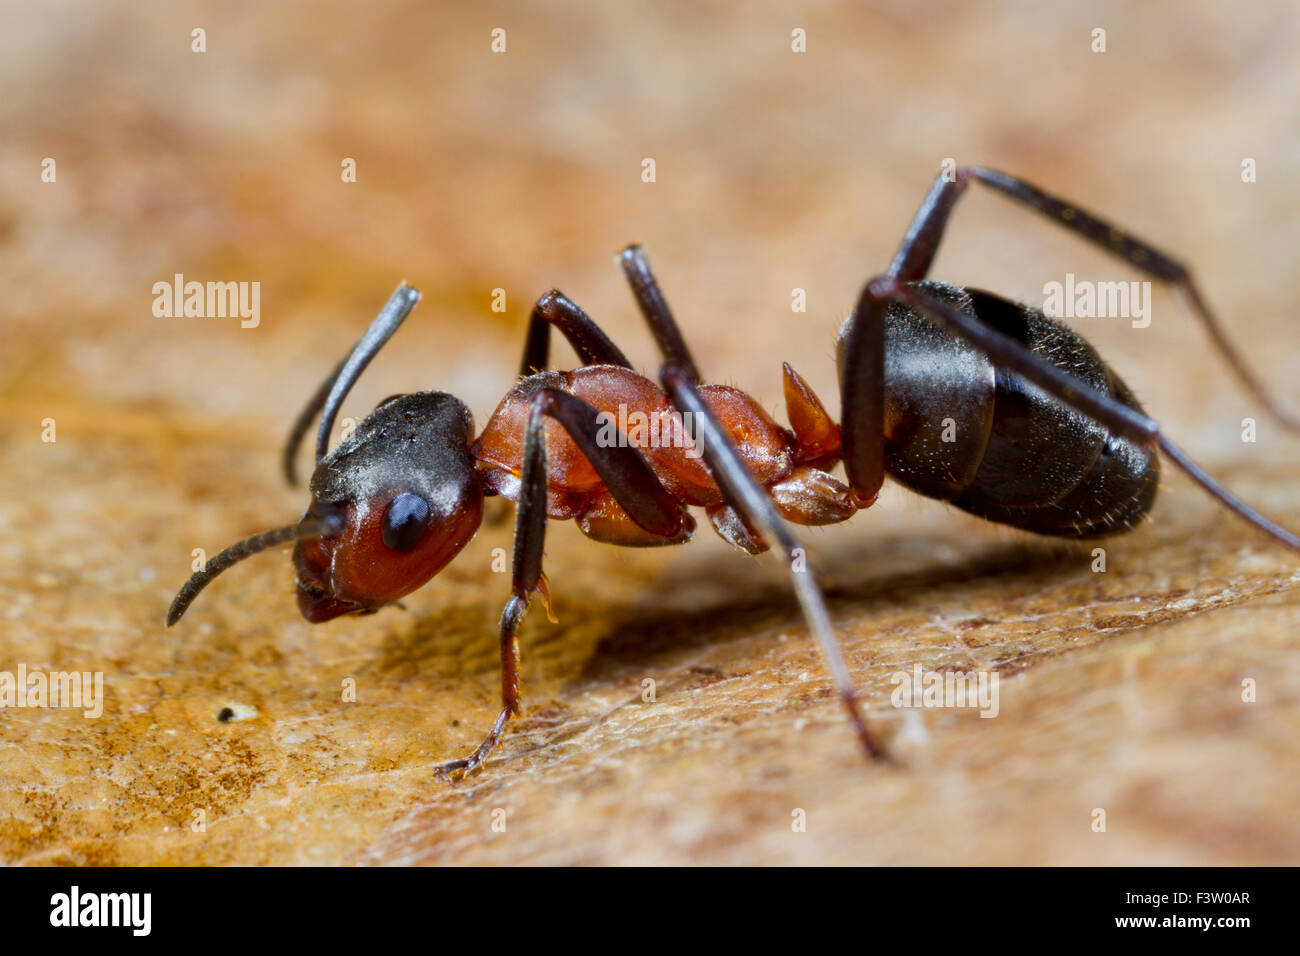 Red Wood Ants (Formica rufa) adult worker drinking from sugar water bait. Shropshire, England. April. Stock Photo